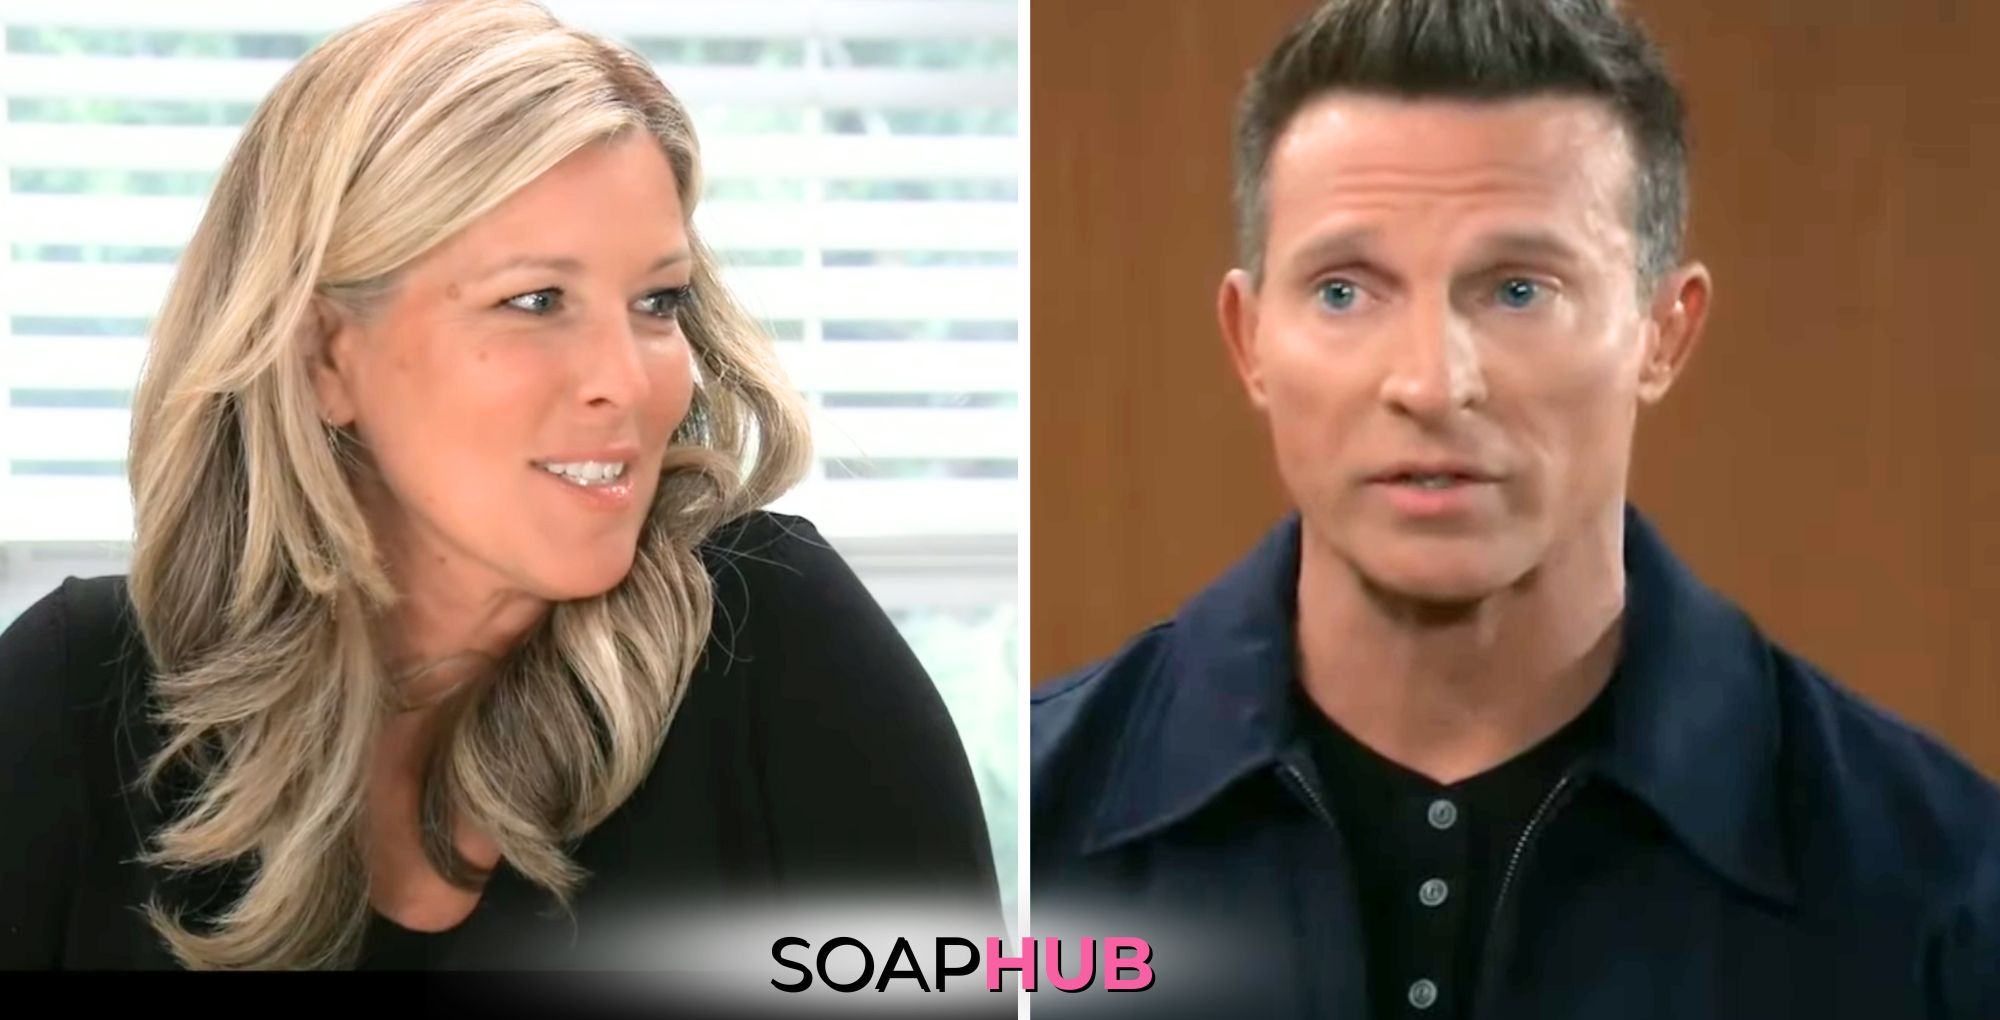 On General Hospital, April 12 spoilers focus on Jason wanting to give something to Carly, with the Soap Hub logo across the bottom.